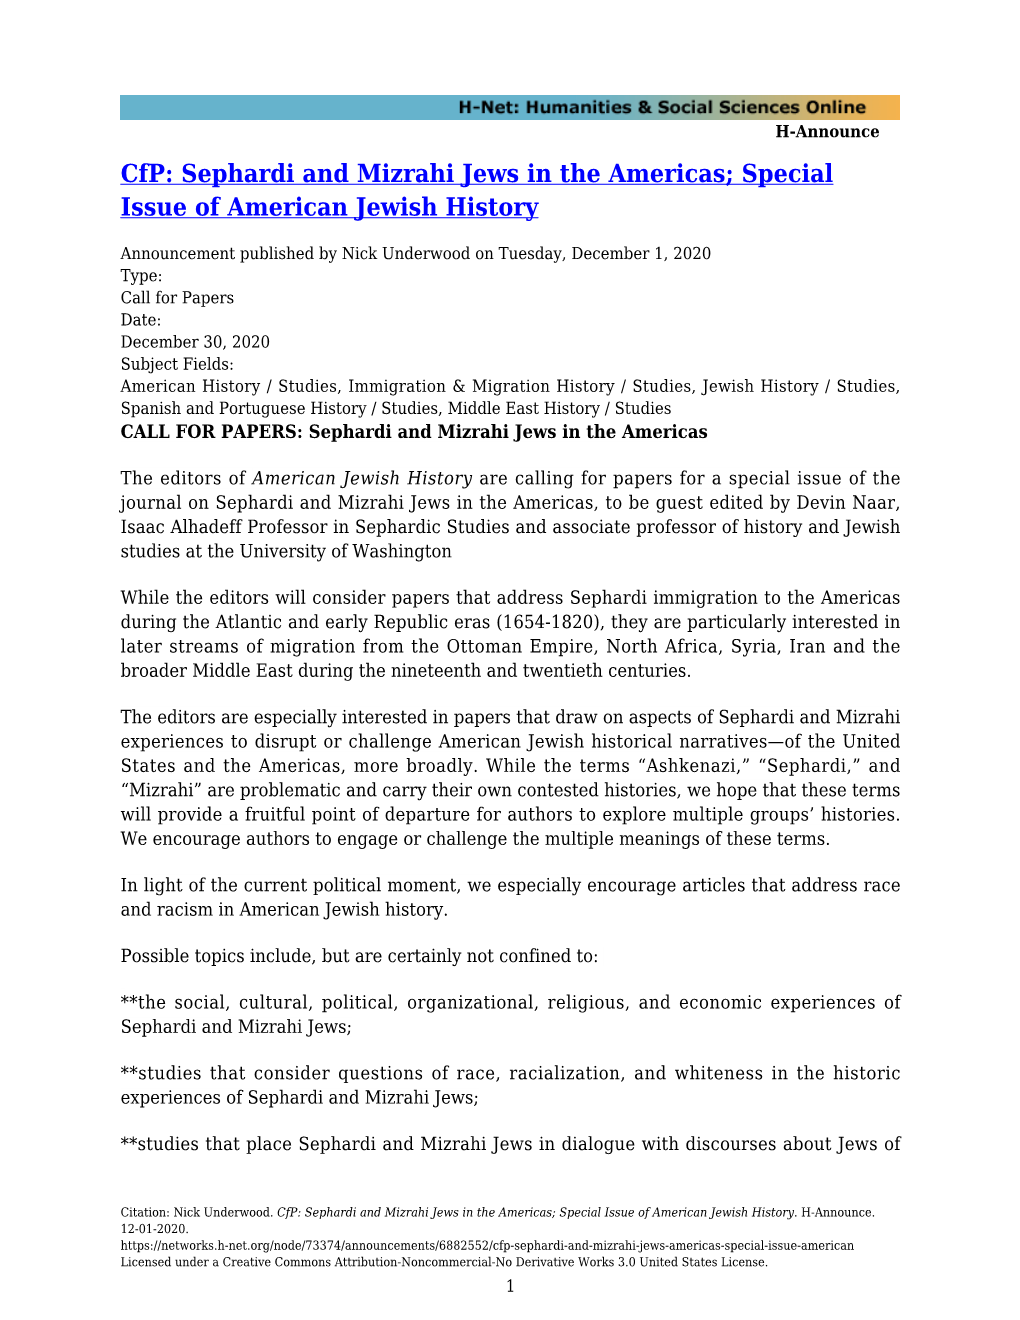 Cfp: Sephardi and Mizrahi Jews in the Americas; Special Issue of American Jewish History